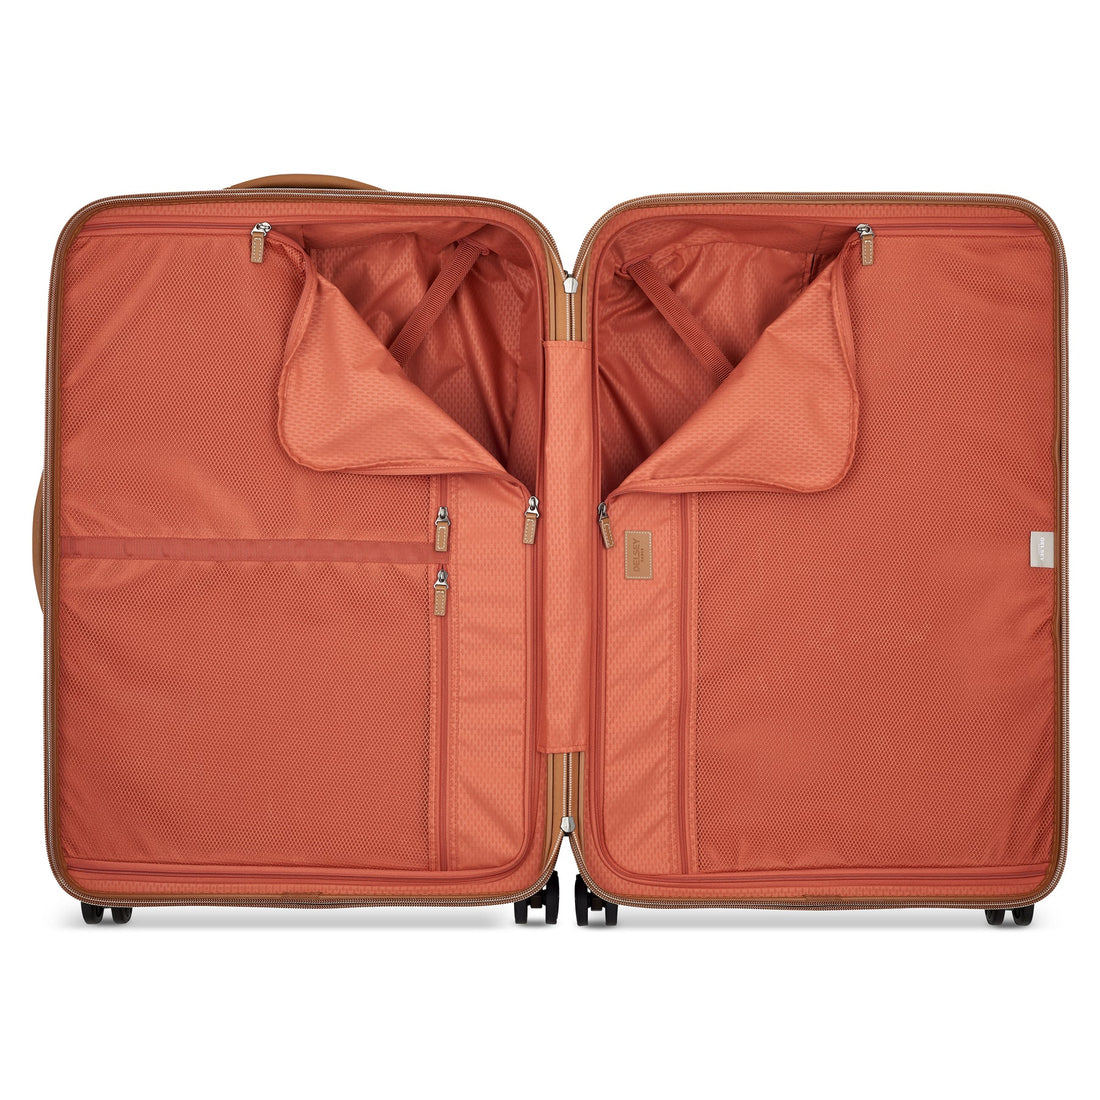 Chatelet Air 2.0 Carry-on Set